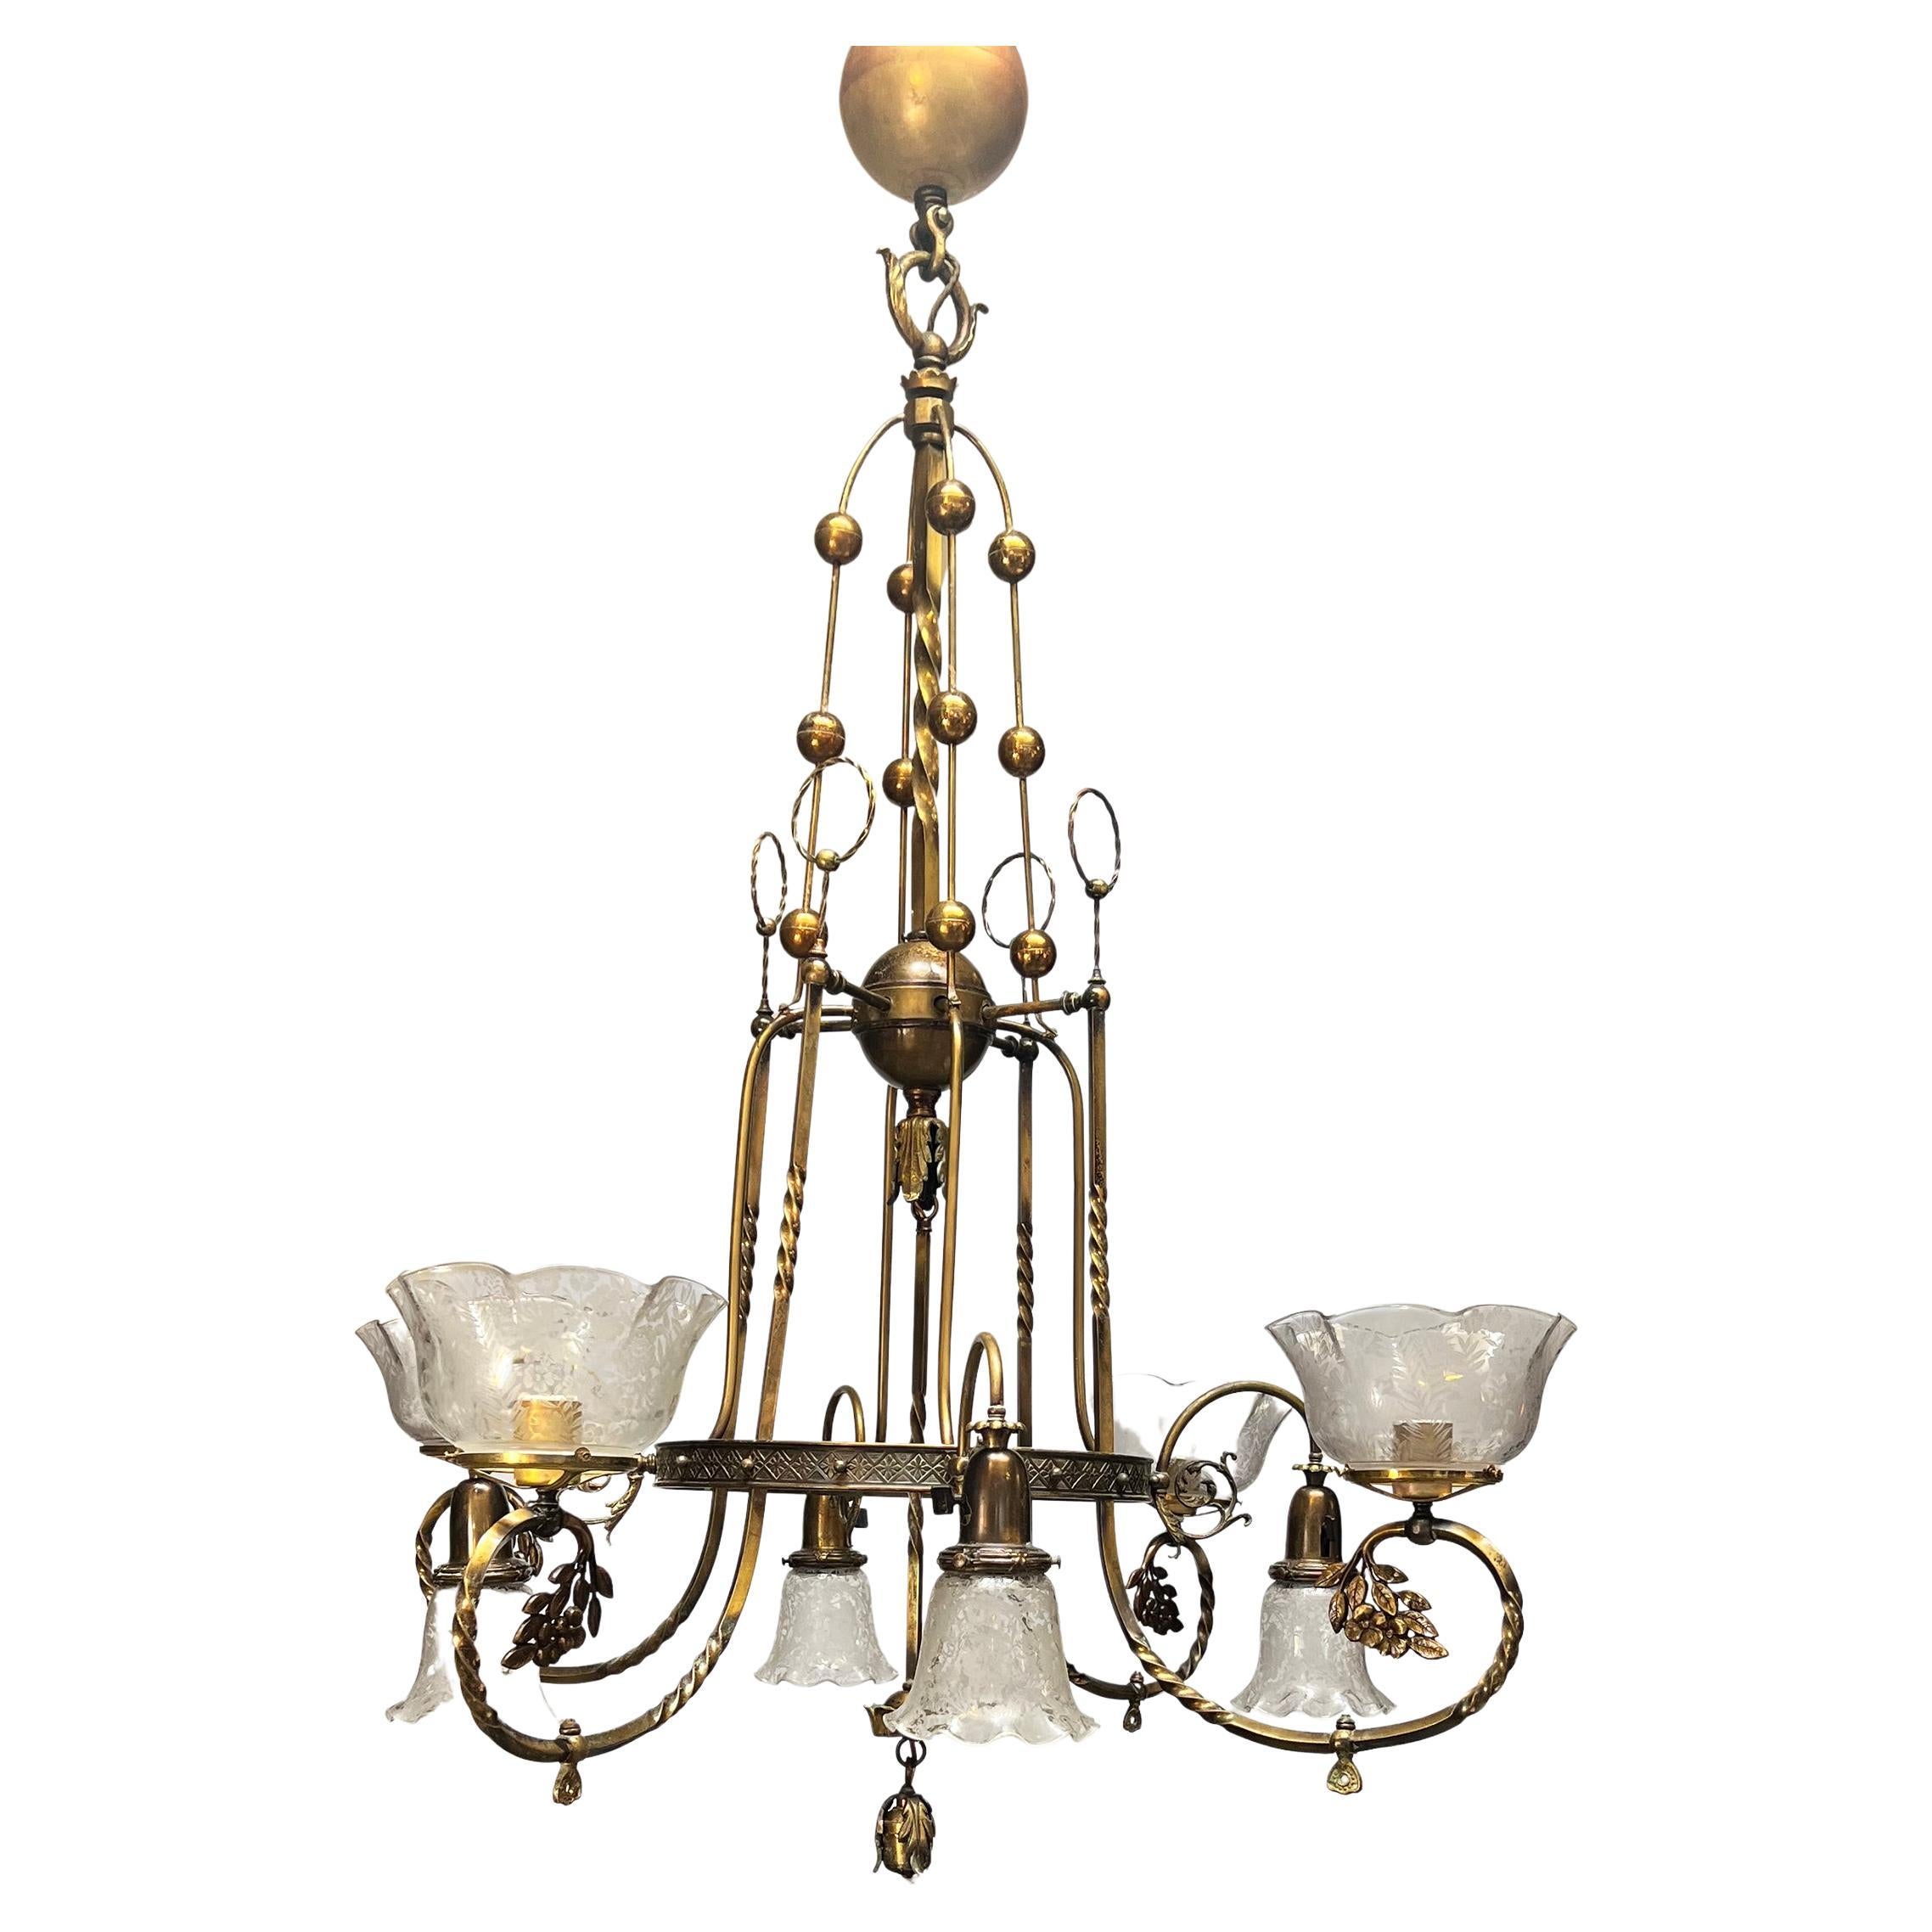 Large, Amazing, Converted Gas to Electric Brass Chandelier For Sale